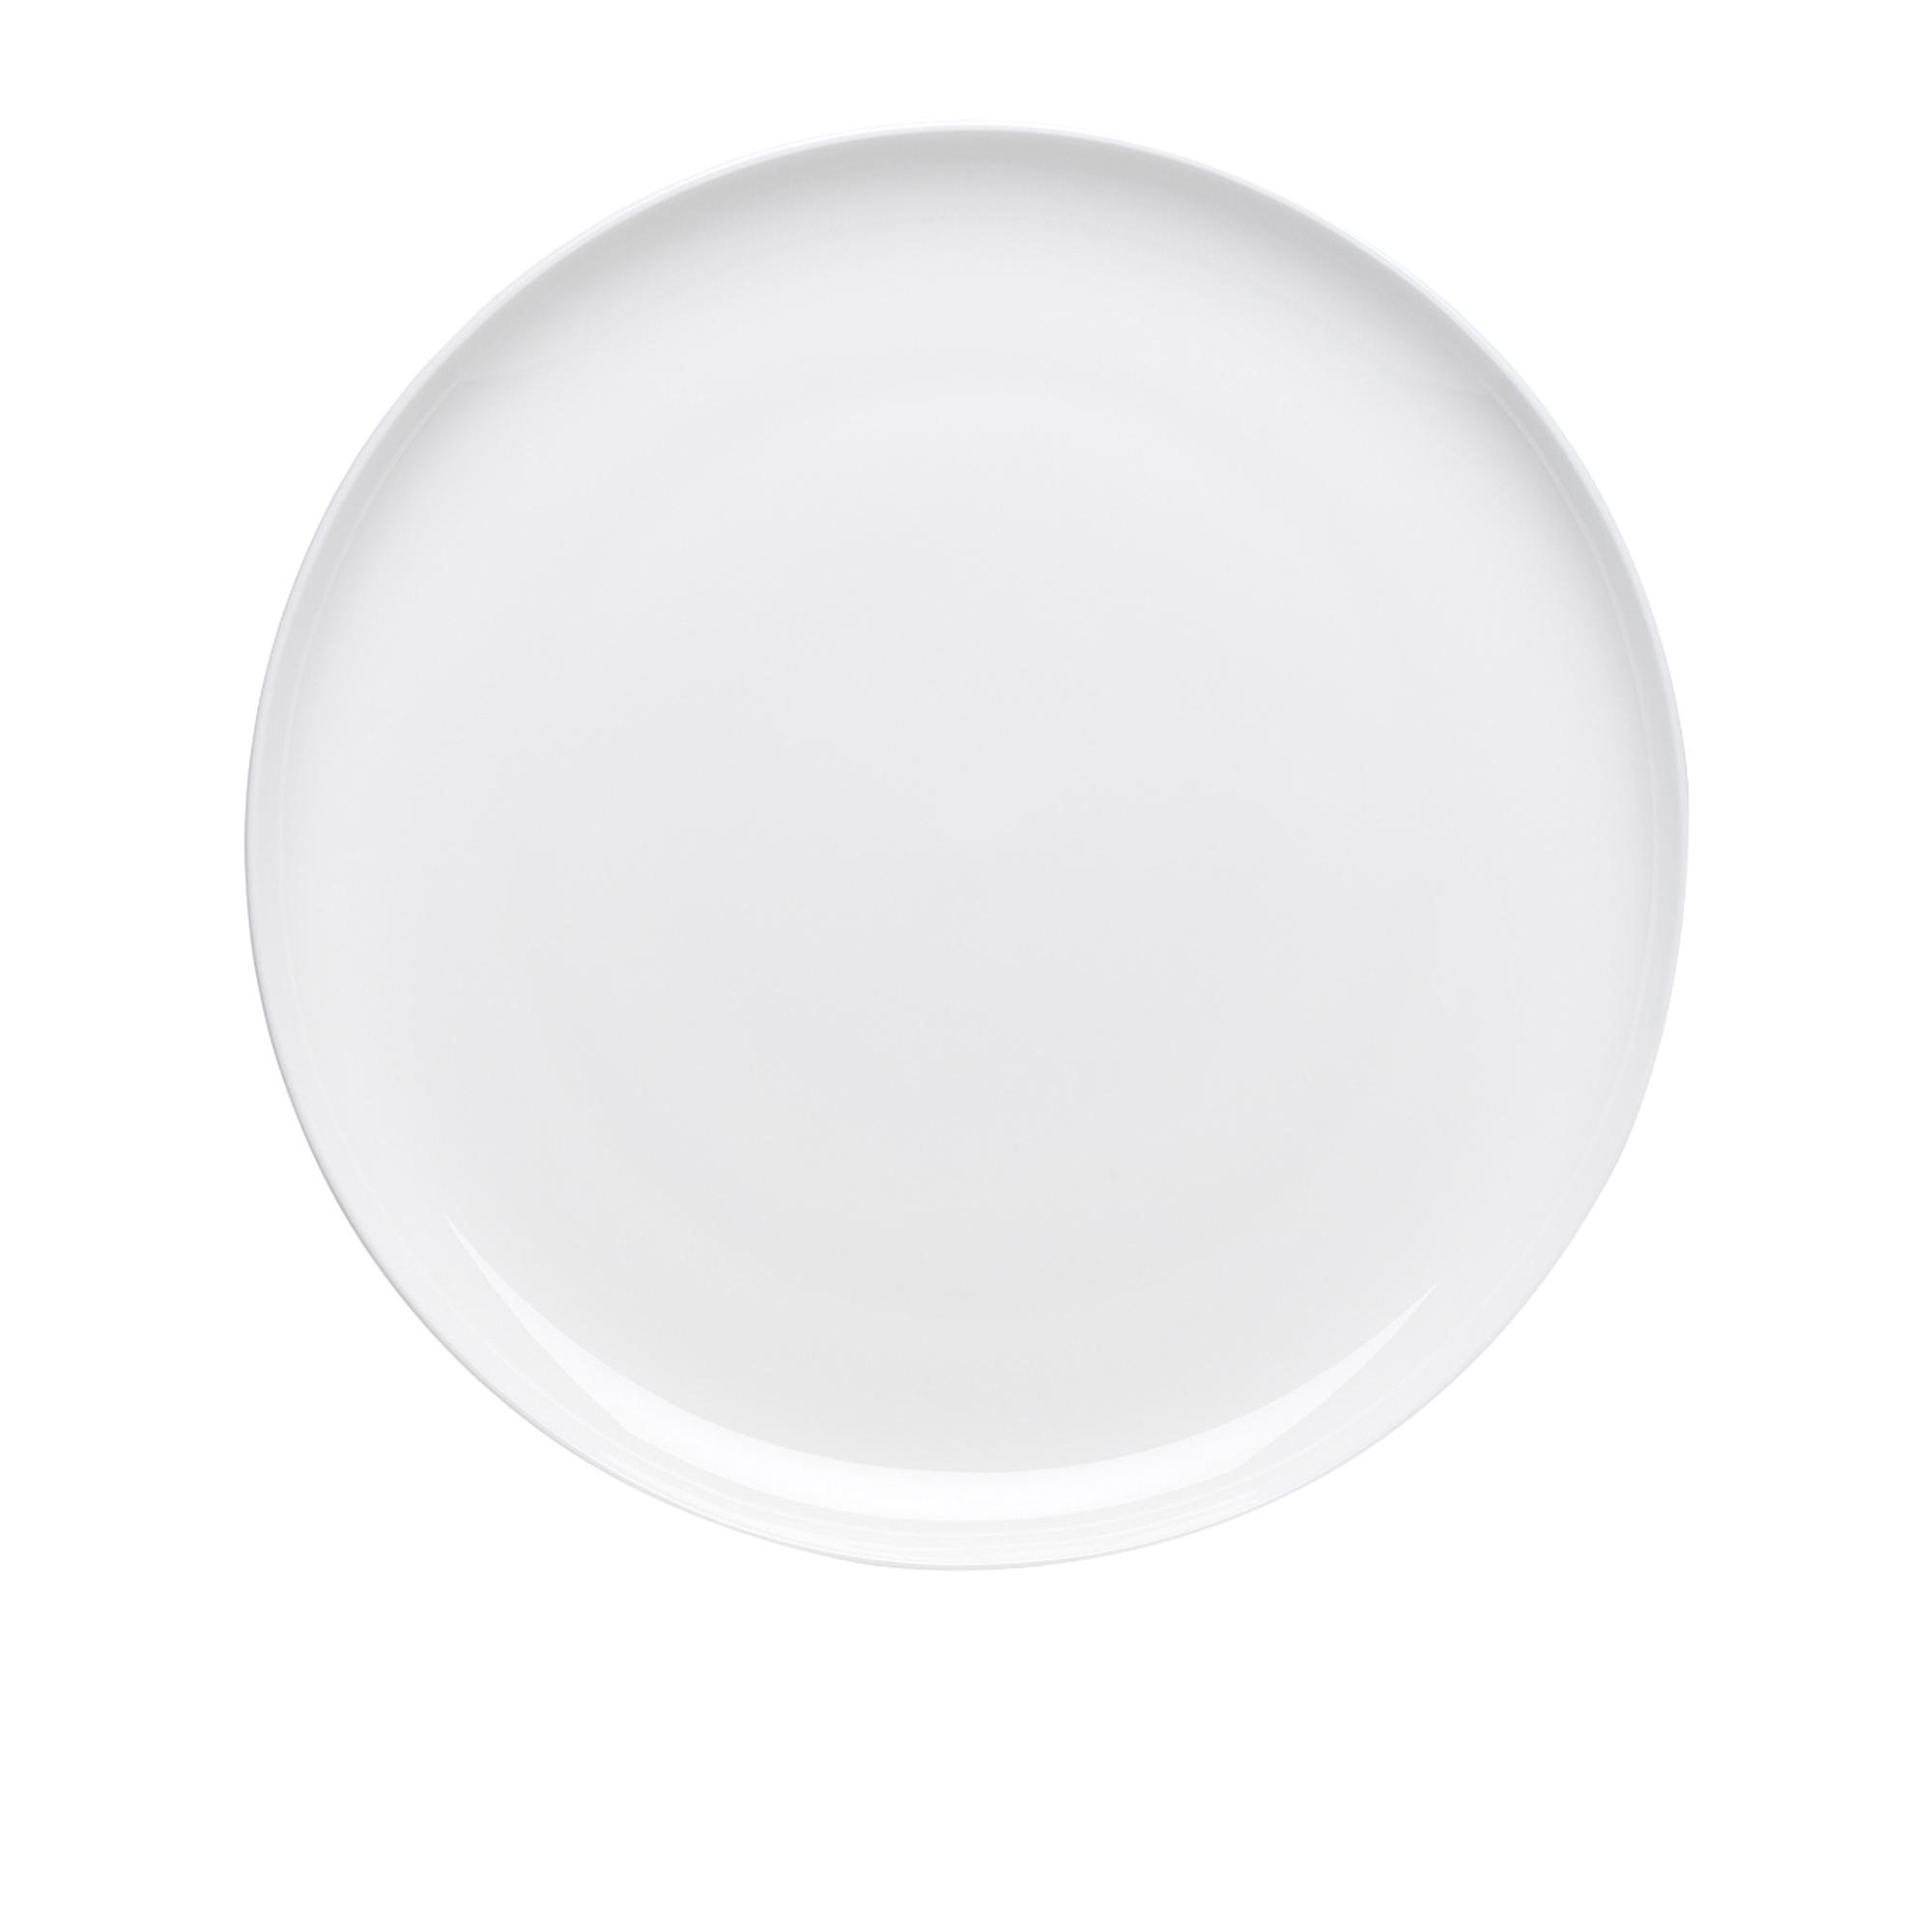 Ecology Canvas Dinner Plate 27cm White Image 1